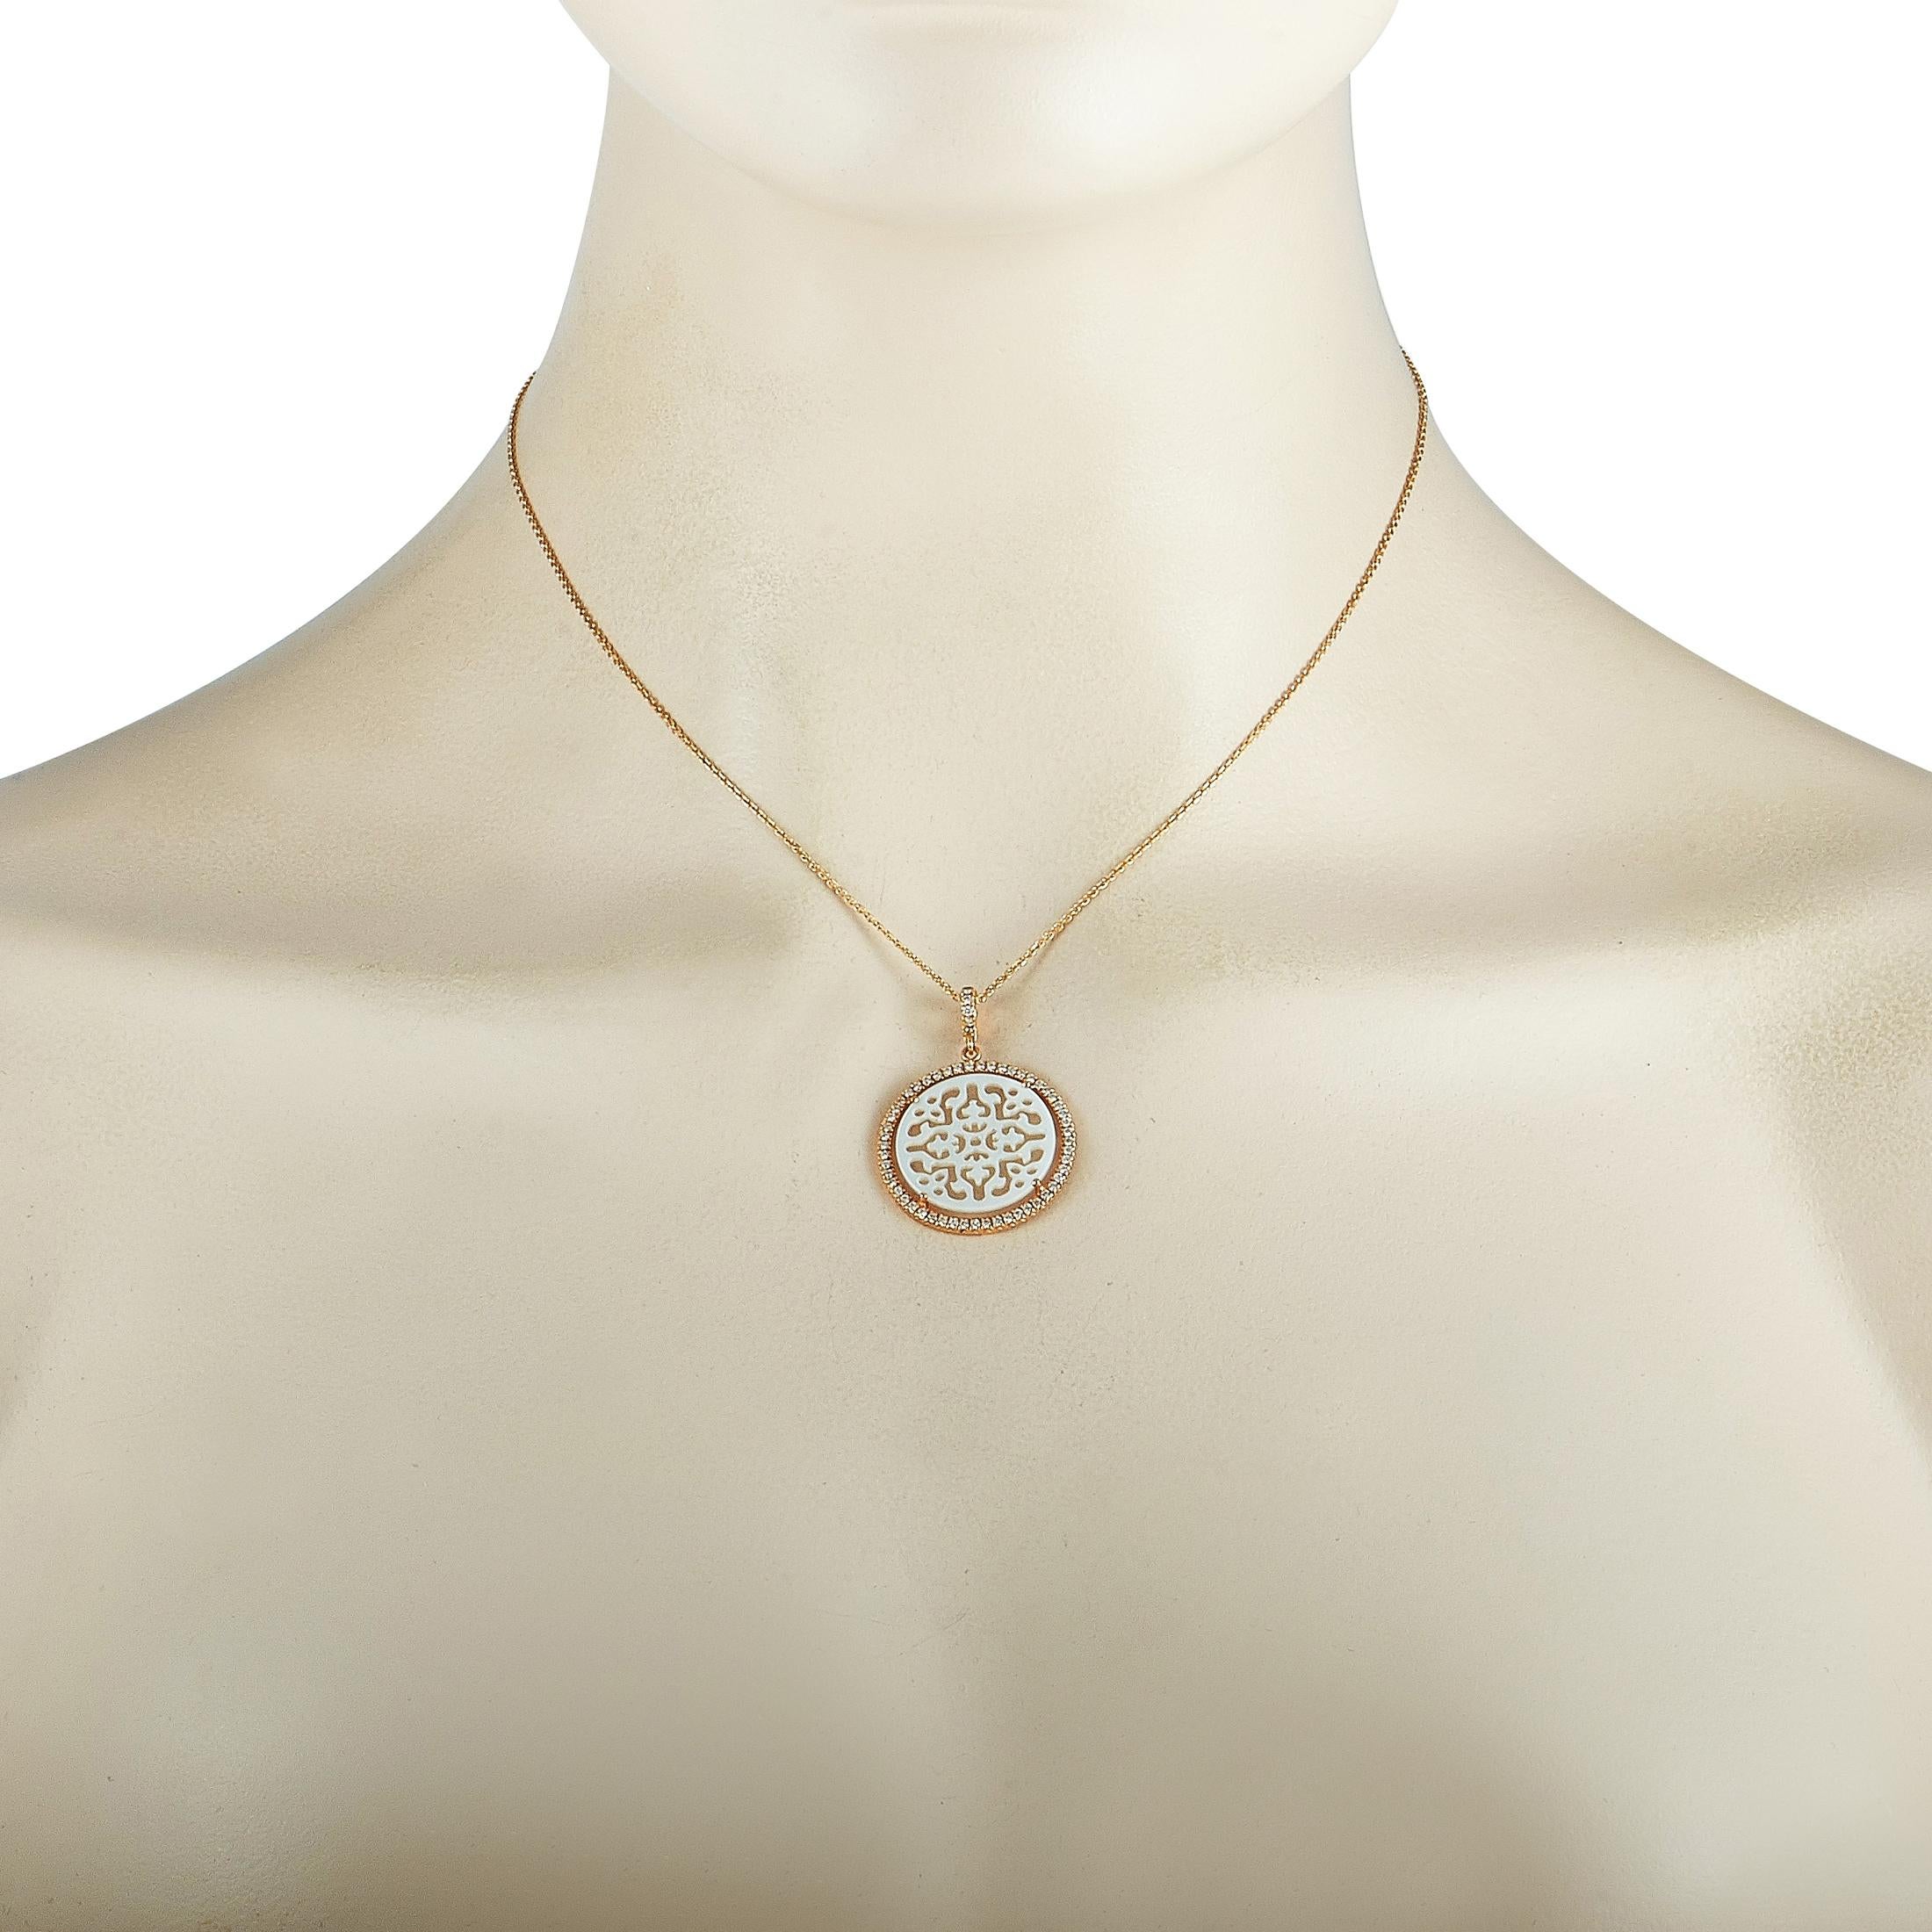 This Zoccai necklace is made of 18K rose gold and weighs 5.1 grams. It is presented with a 16” chain onto which a 1.25” by 1” pendant is attached. The necklace is embellished with mother of pearl and a total of 0.46 carats of diamonds.
 
 Offered in